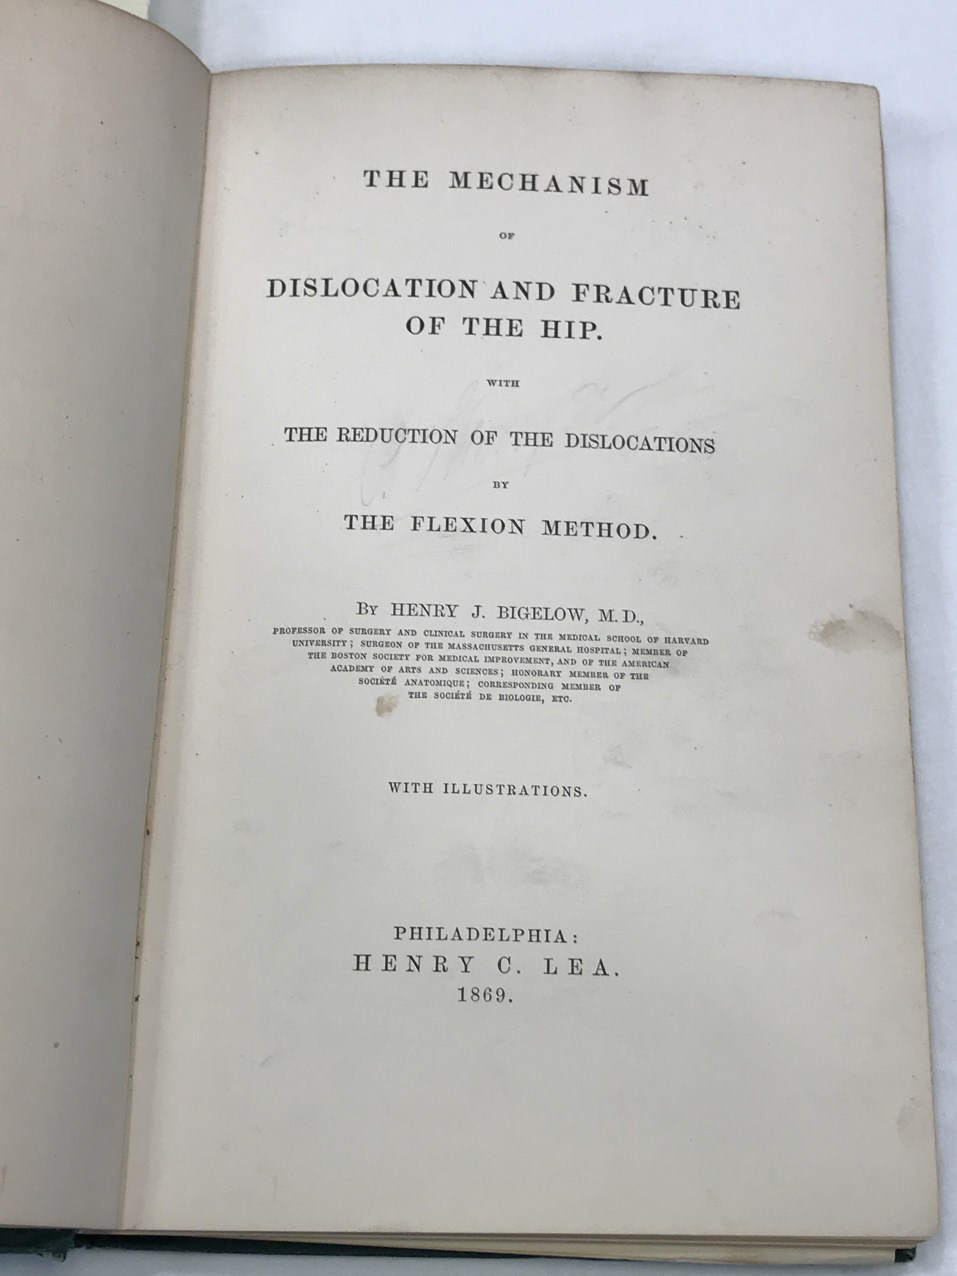 title page to Bigelow's book